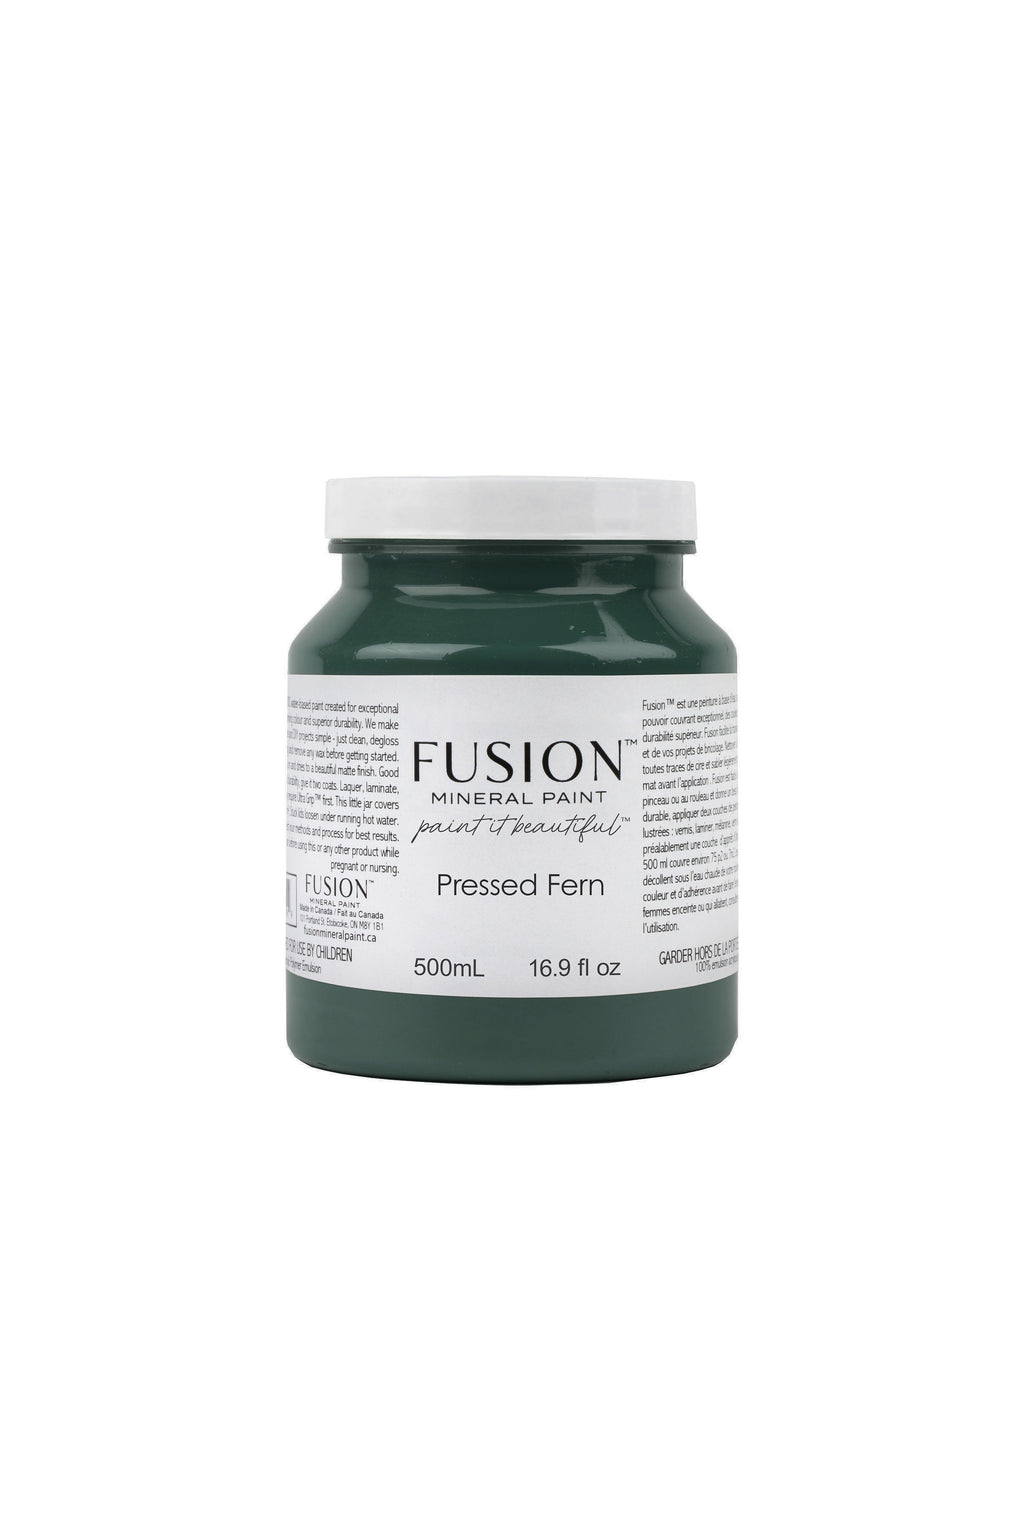 Pressed Fern Fusion Mineral Paint - Pint